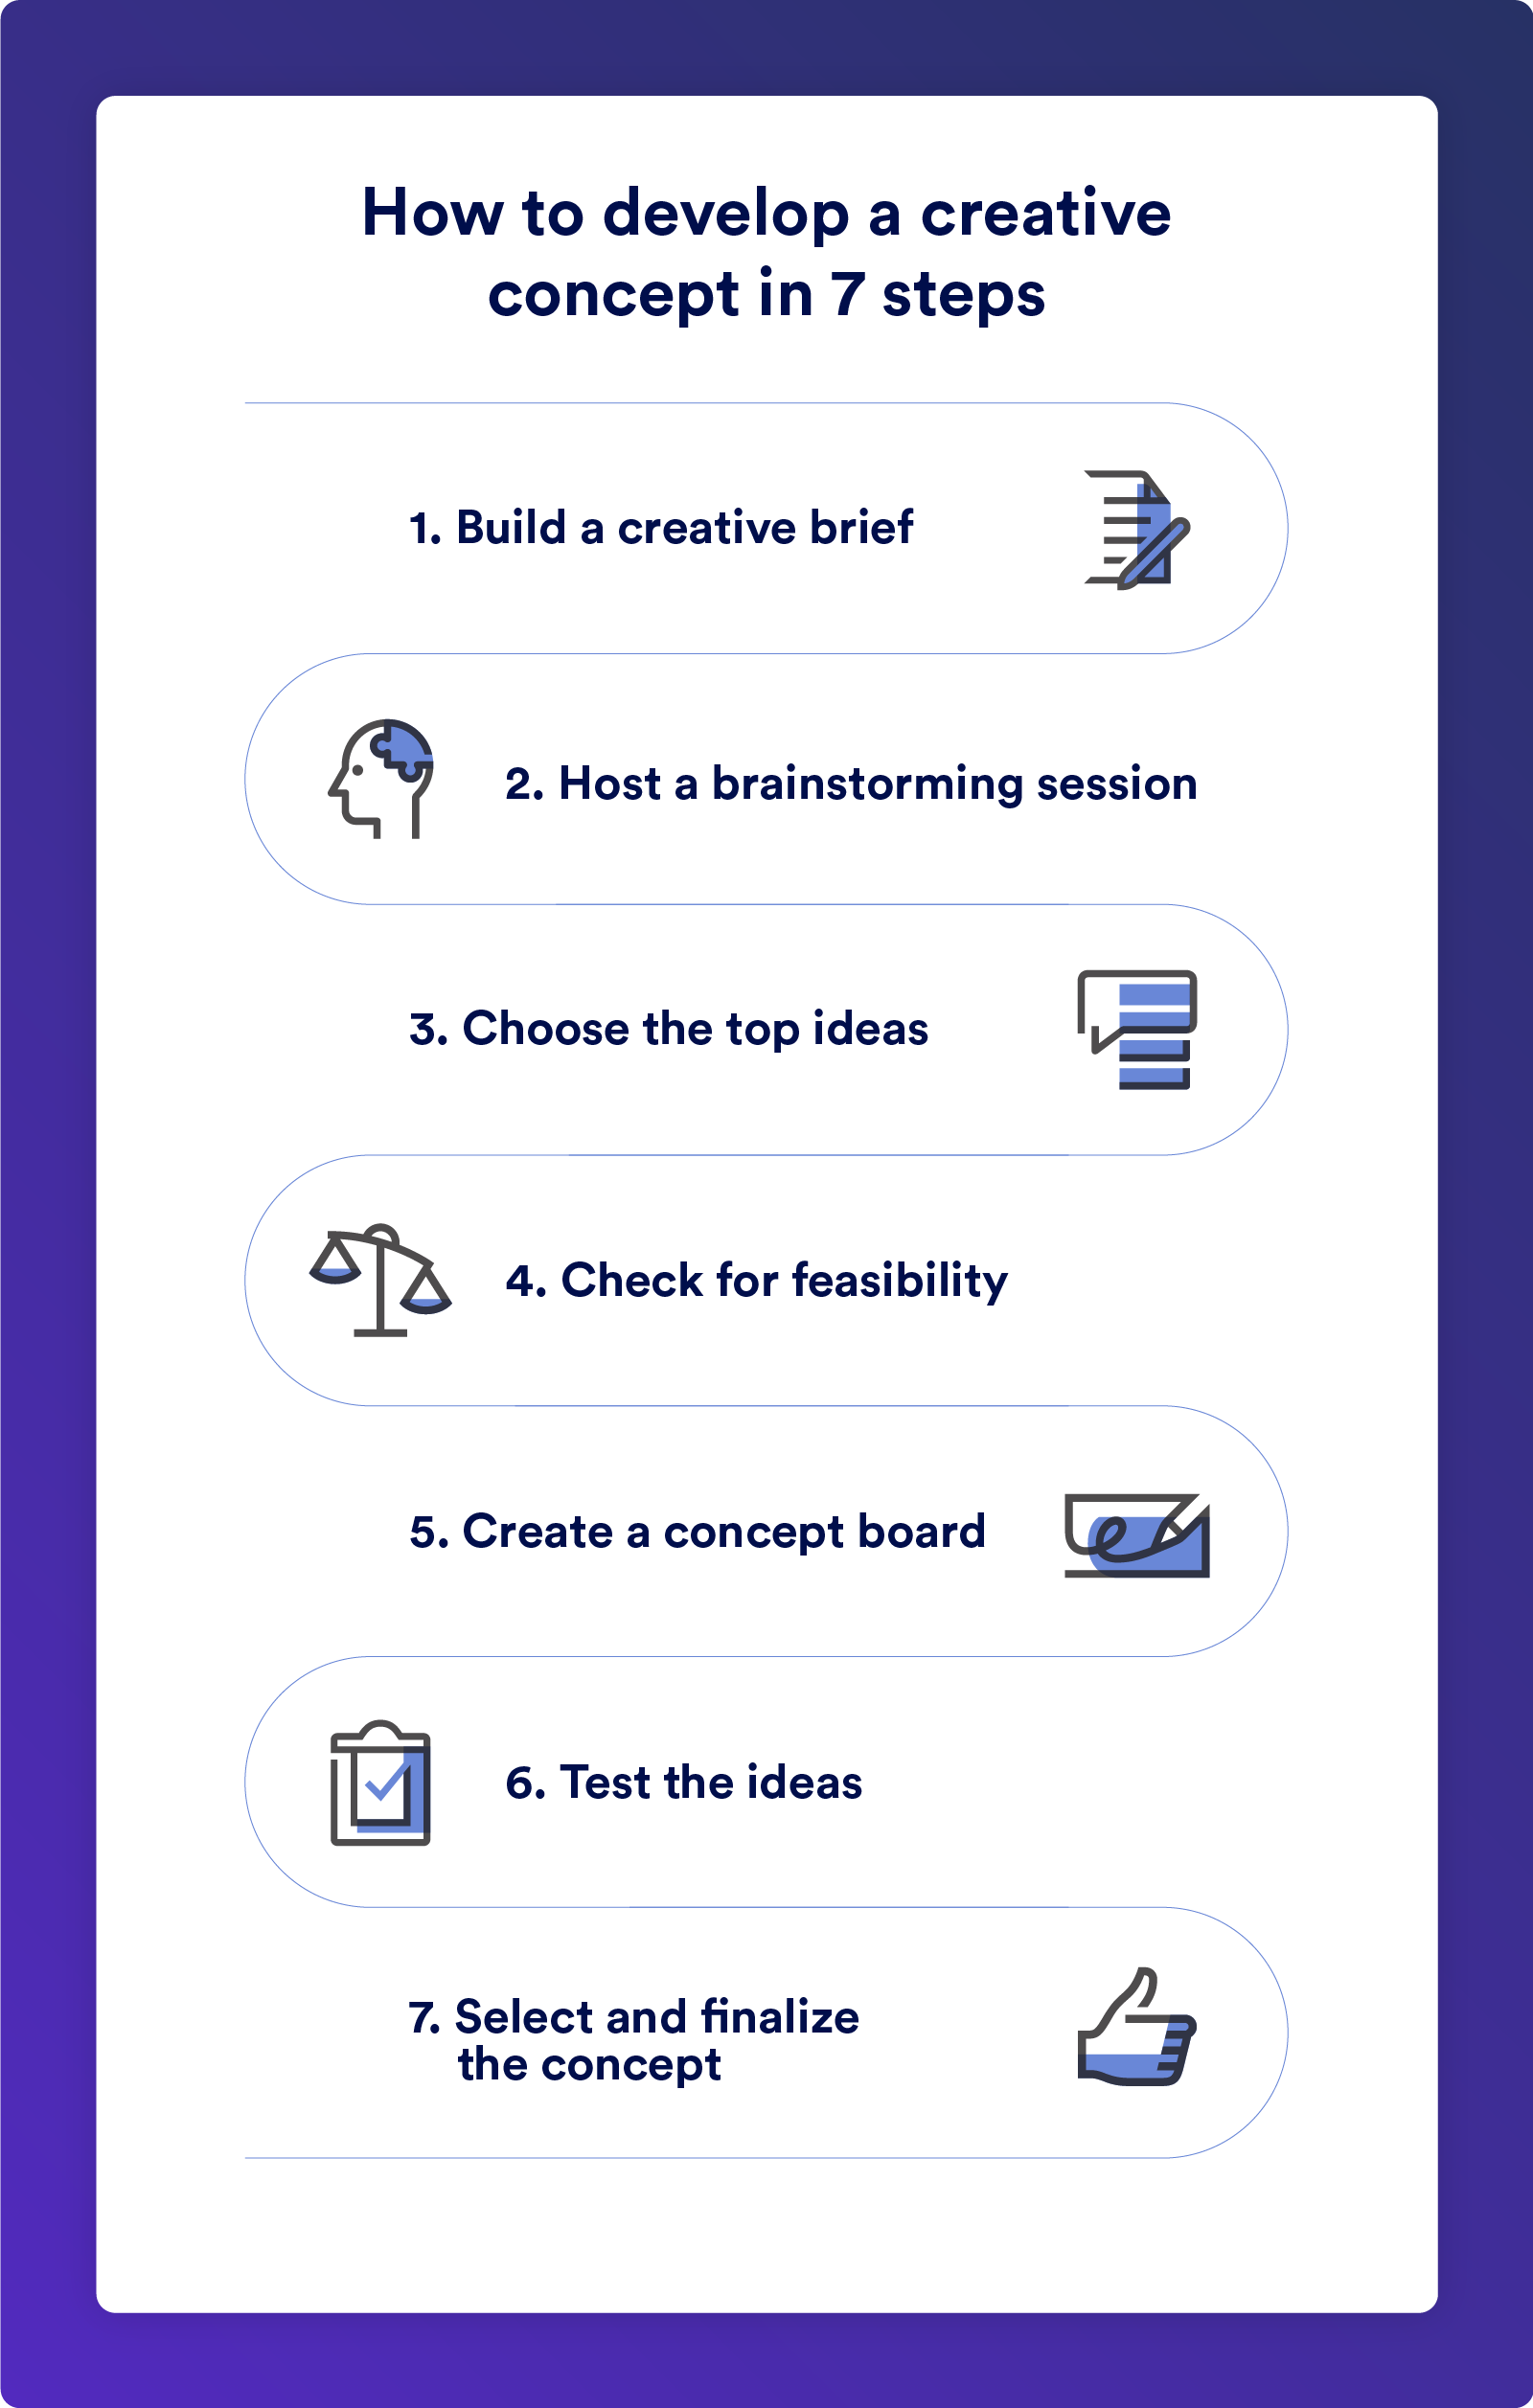 7 steps to developing a creative concept